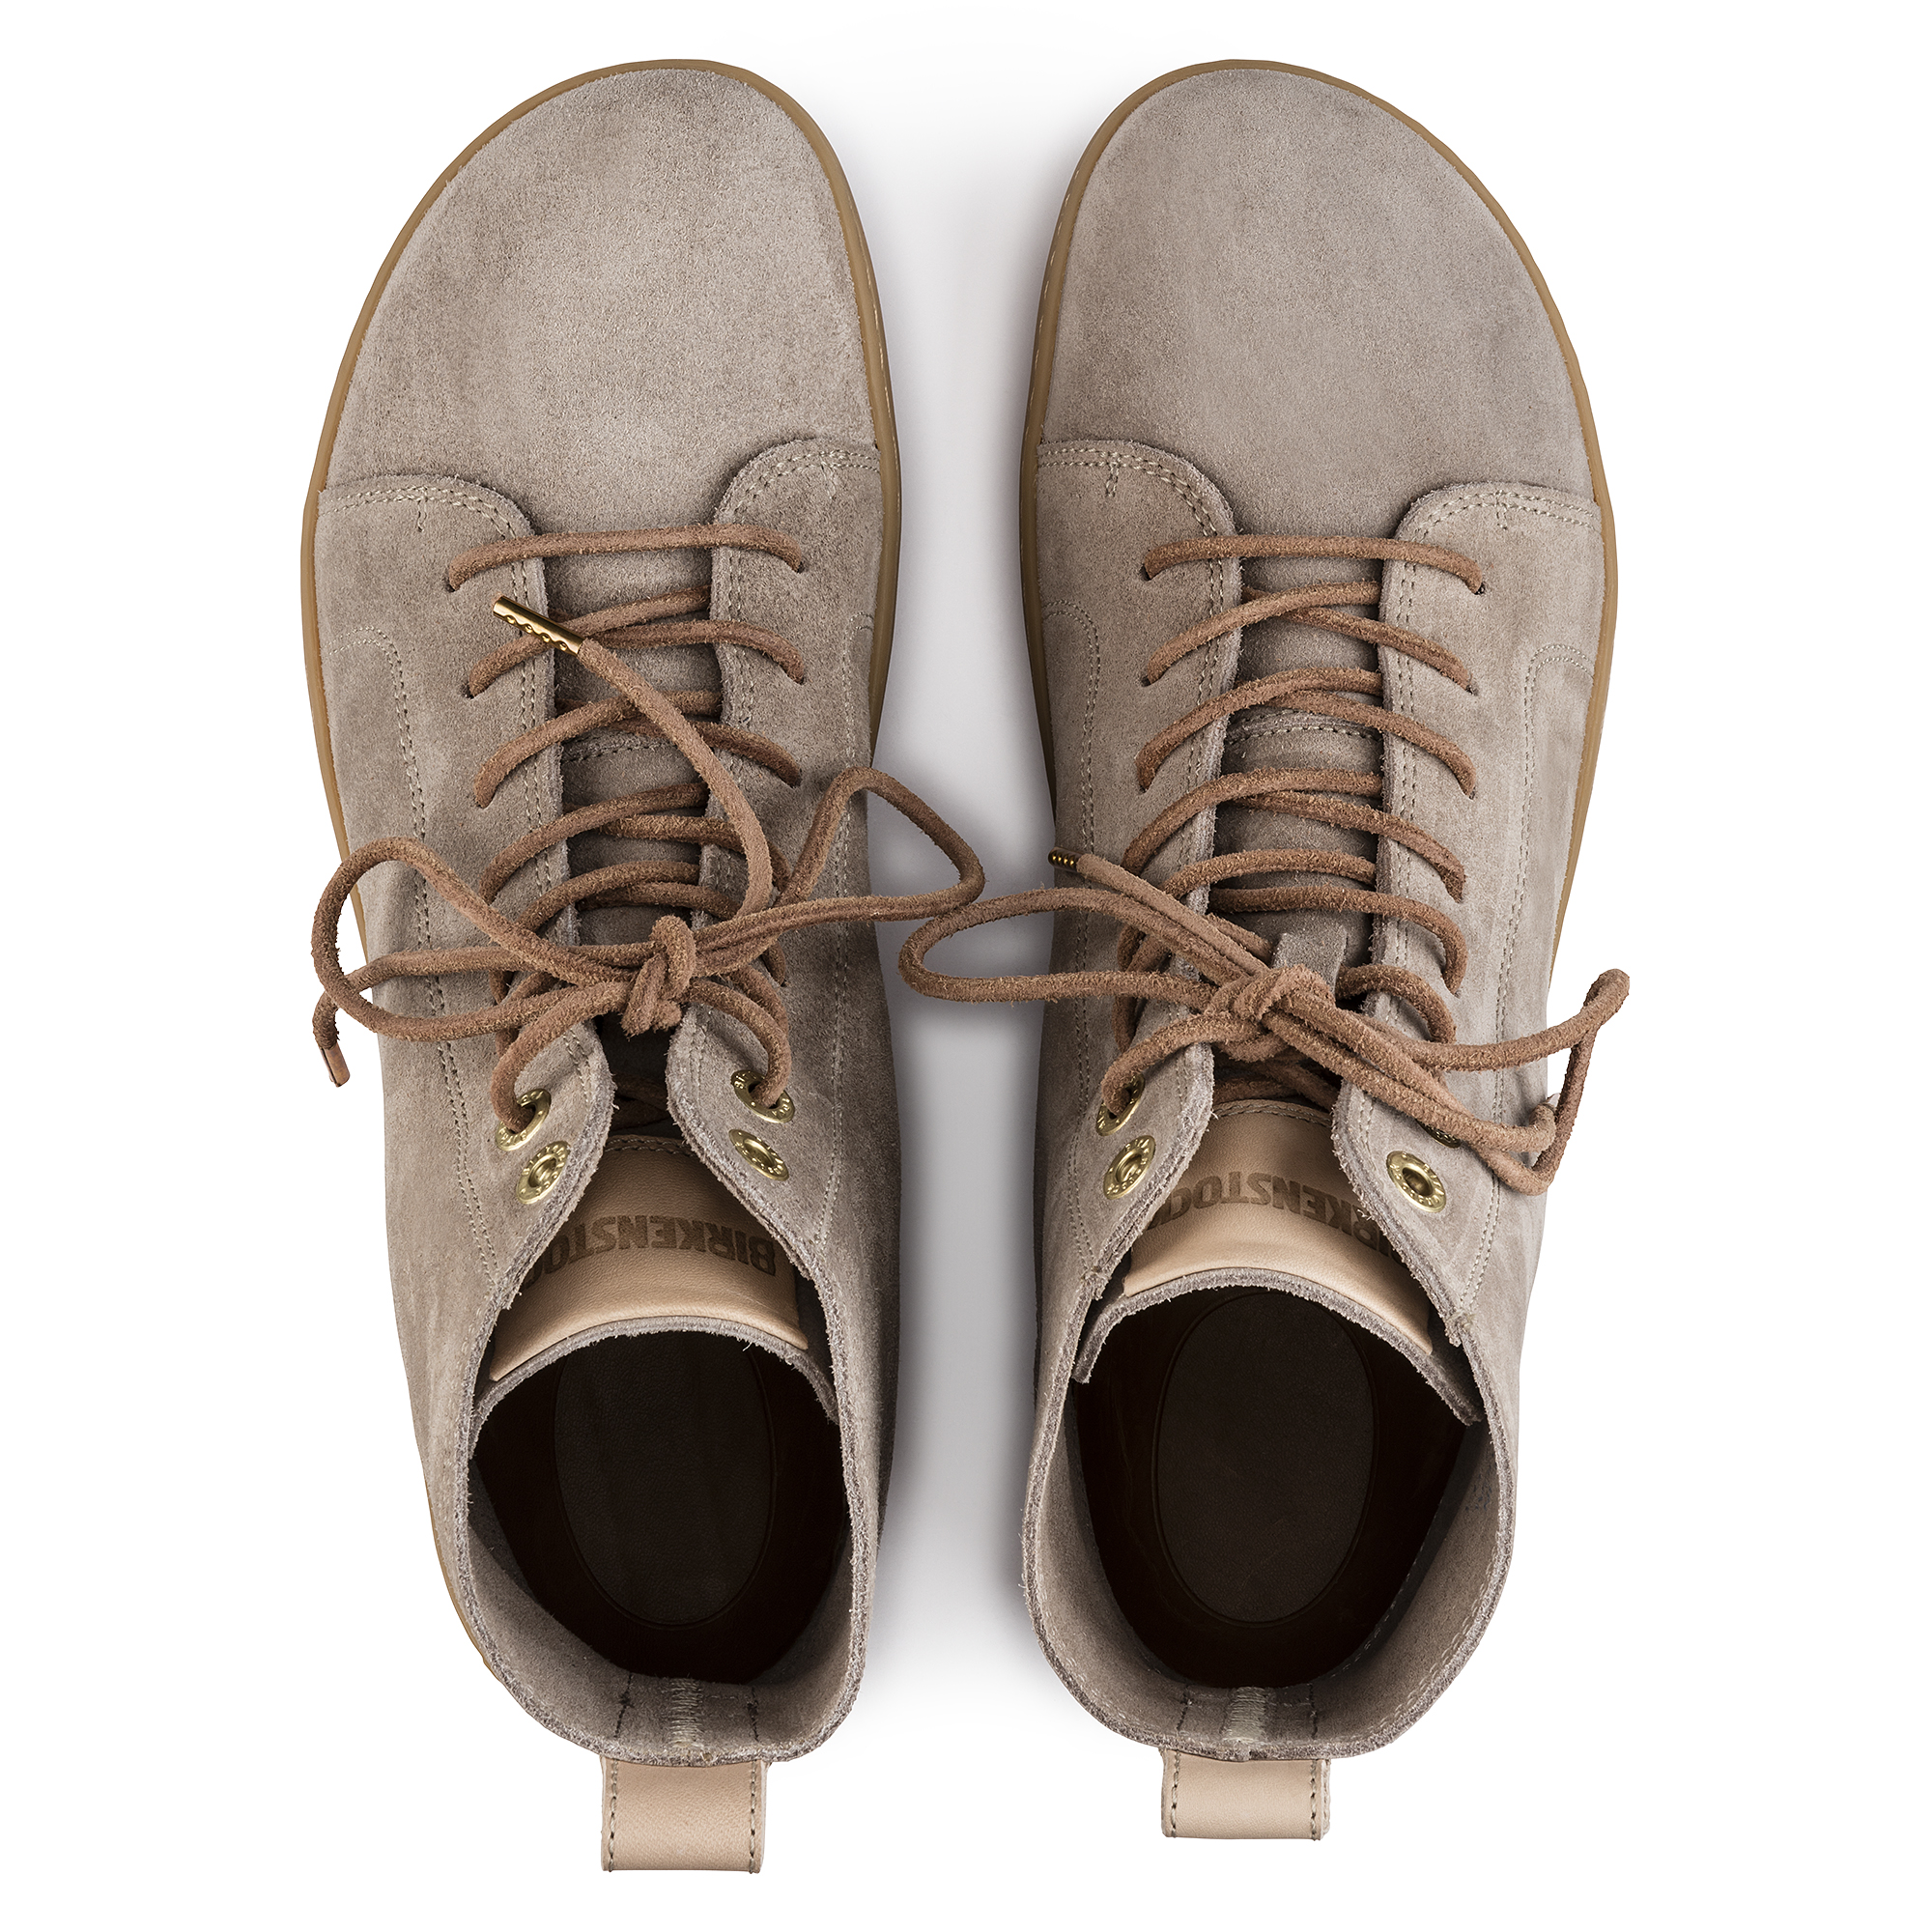 Bartlett Suede Leather Taupe | shop 